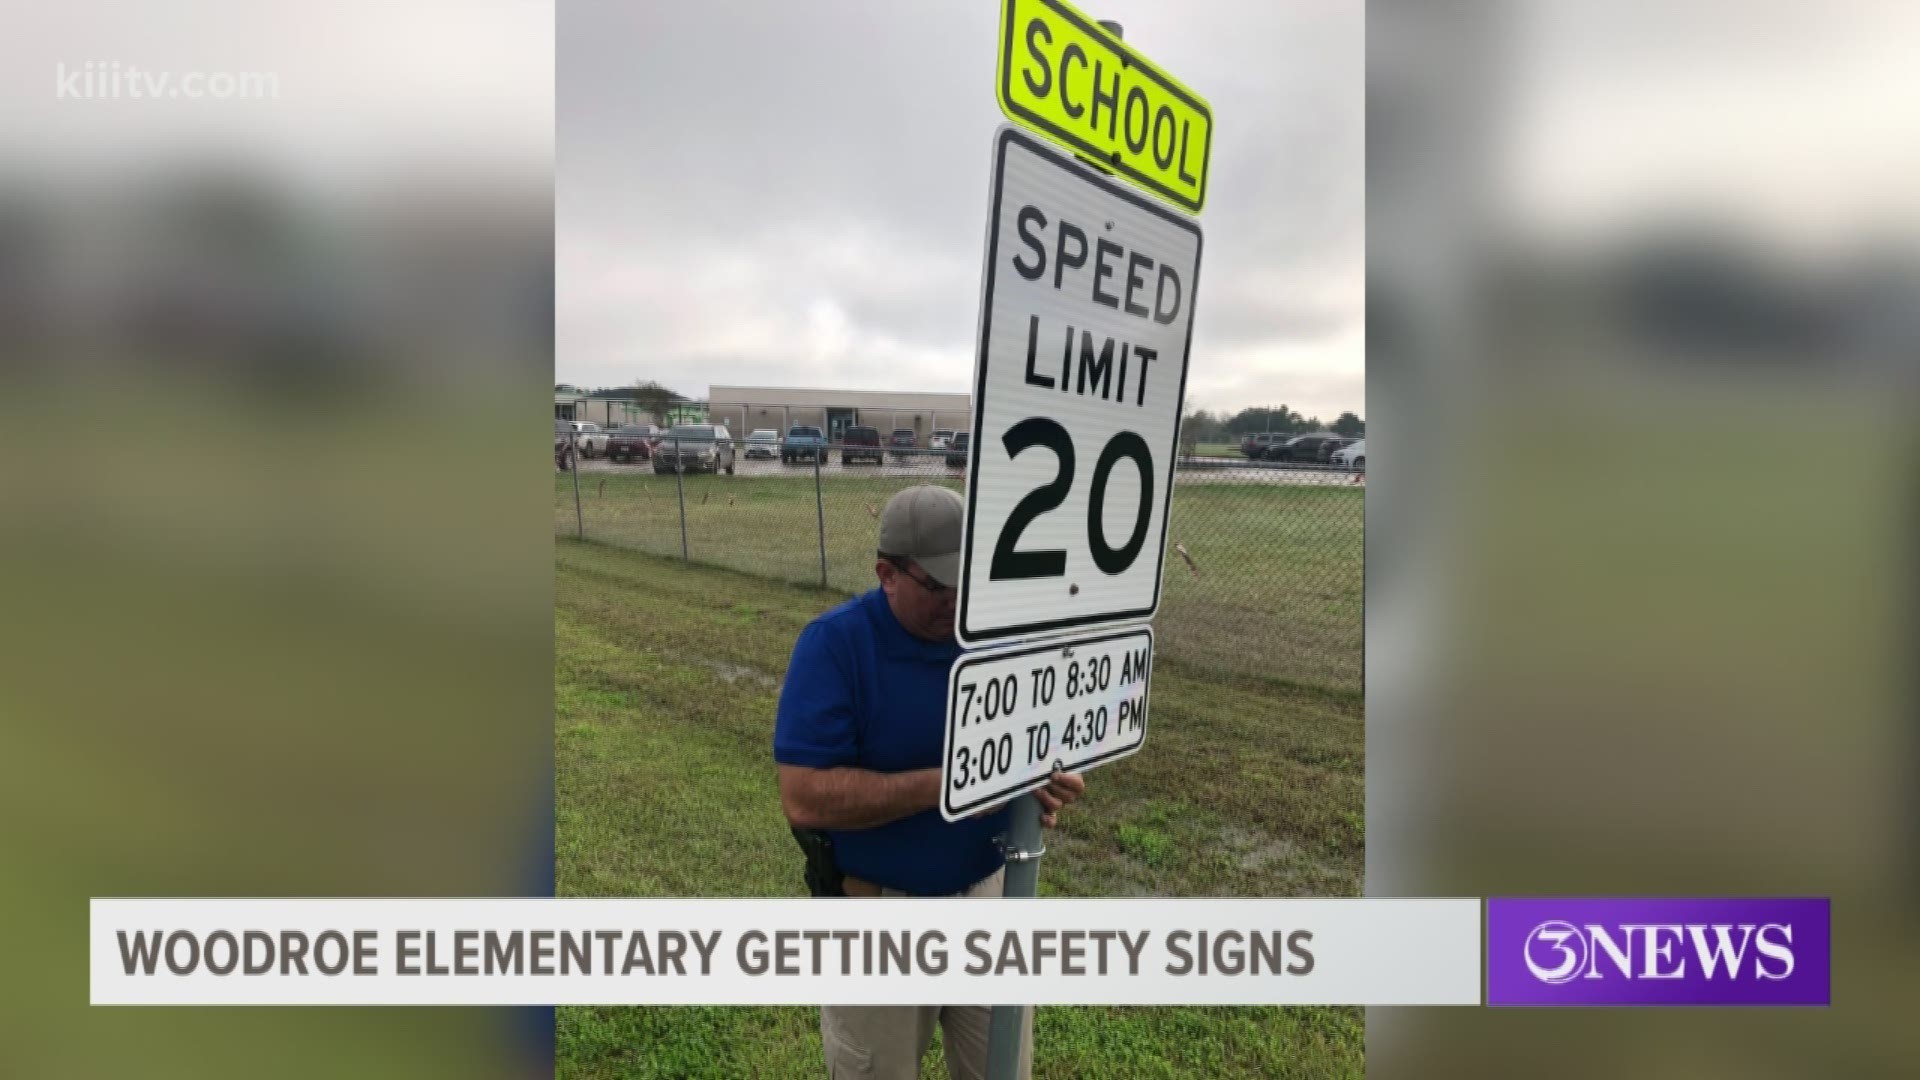 After going five decades without safety signs, one Coastal Bend school district will finally get much-needed additions.